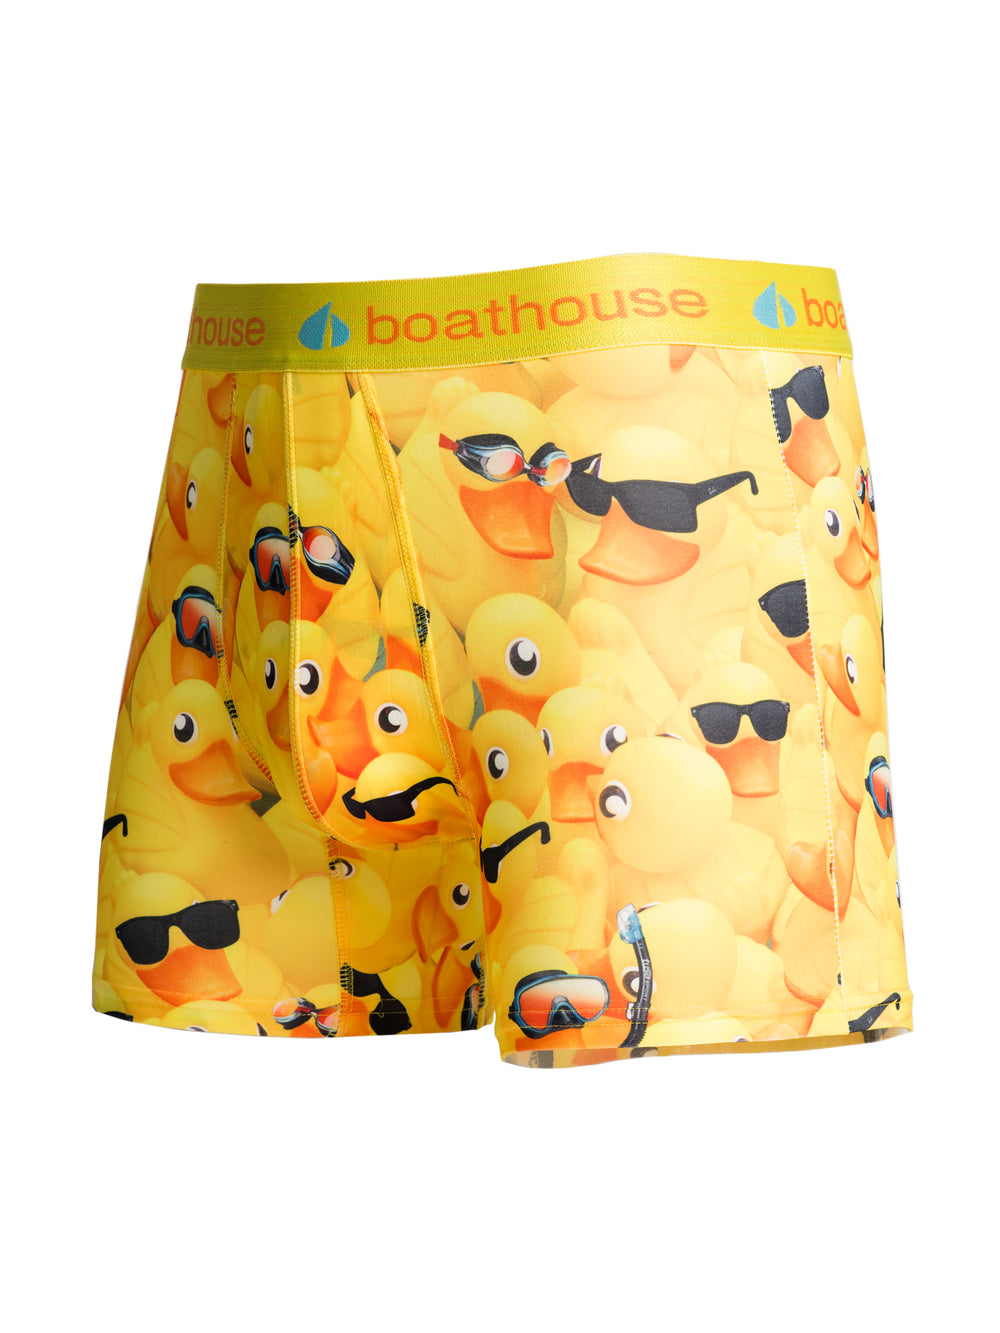 BOATHOUSE NOVELTY BOXER BRIEF - RUBBER DUCK - CLEARANCE